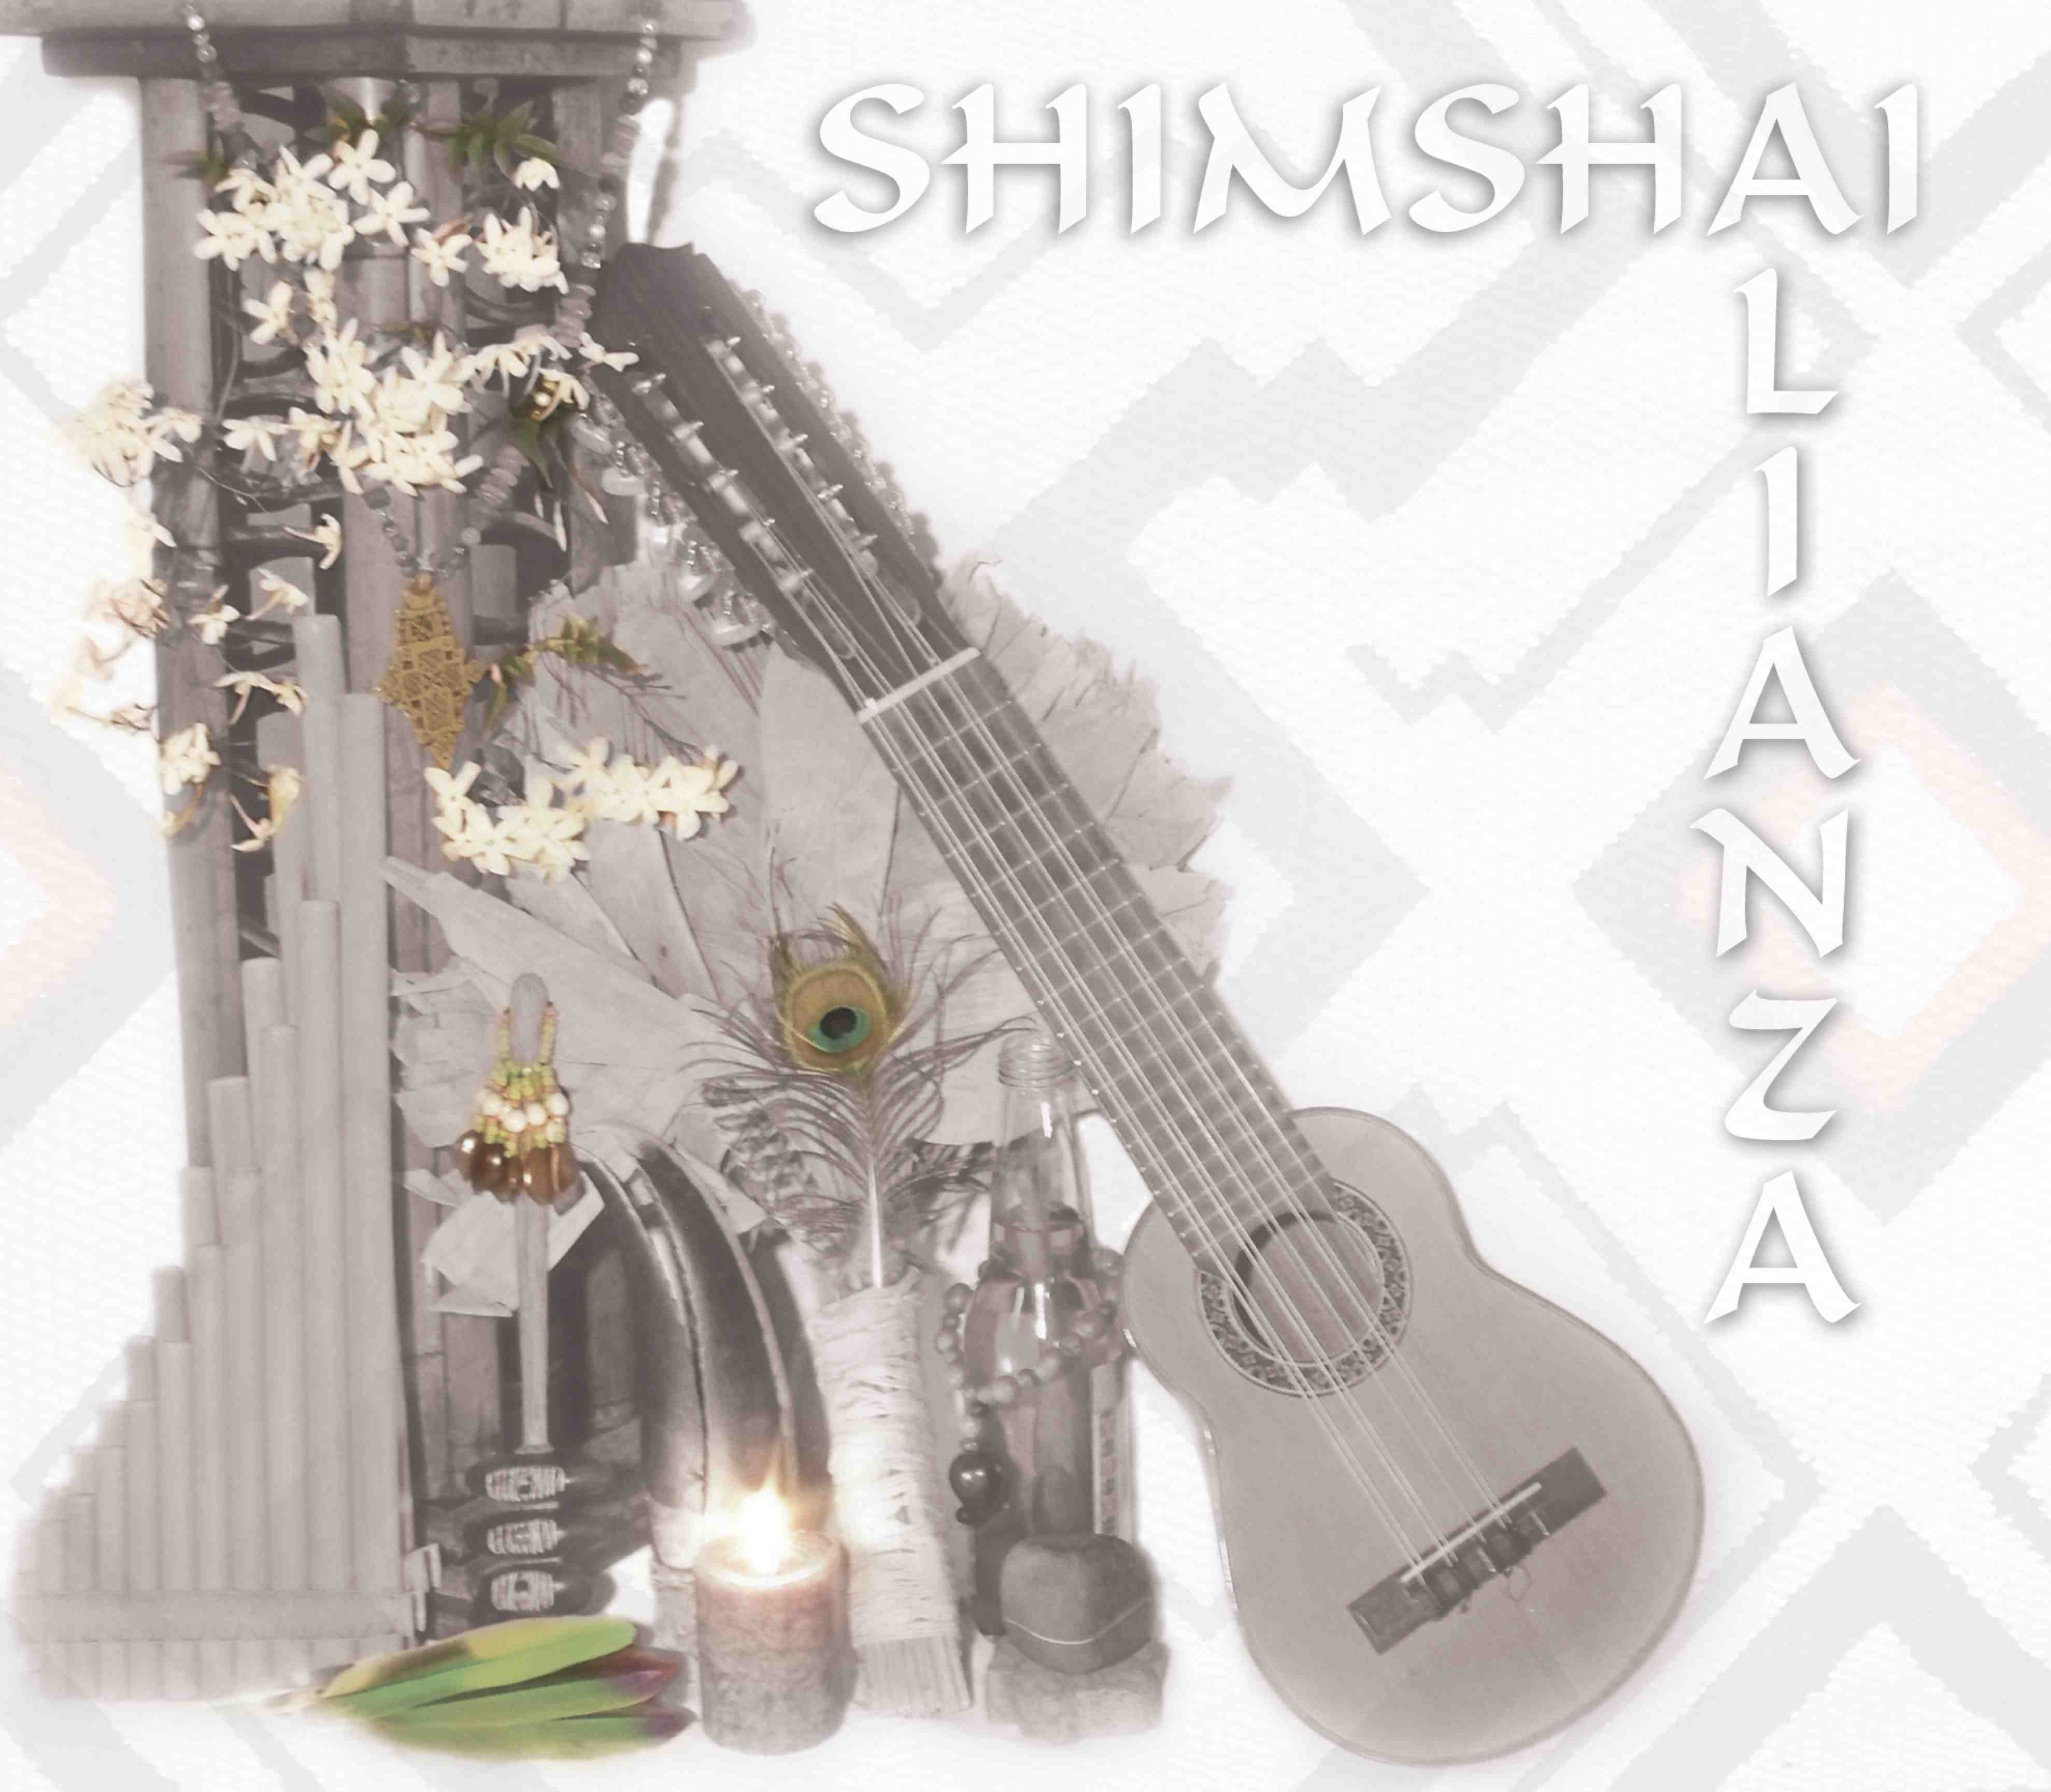 Shimshai explores world traditions through sound, language and sacred song on Alianza featuring medicine music, musica medicina and sacred world folk fusion. 